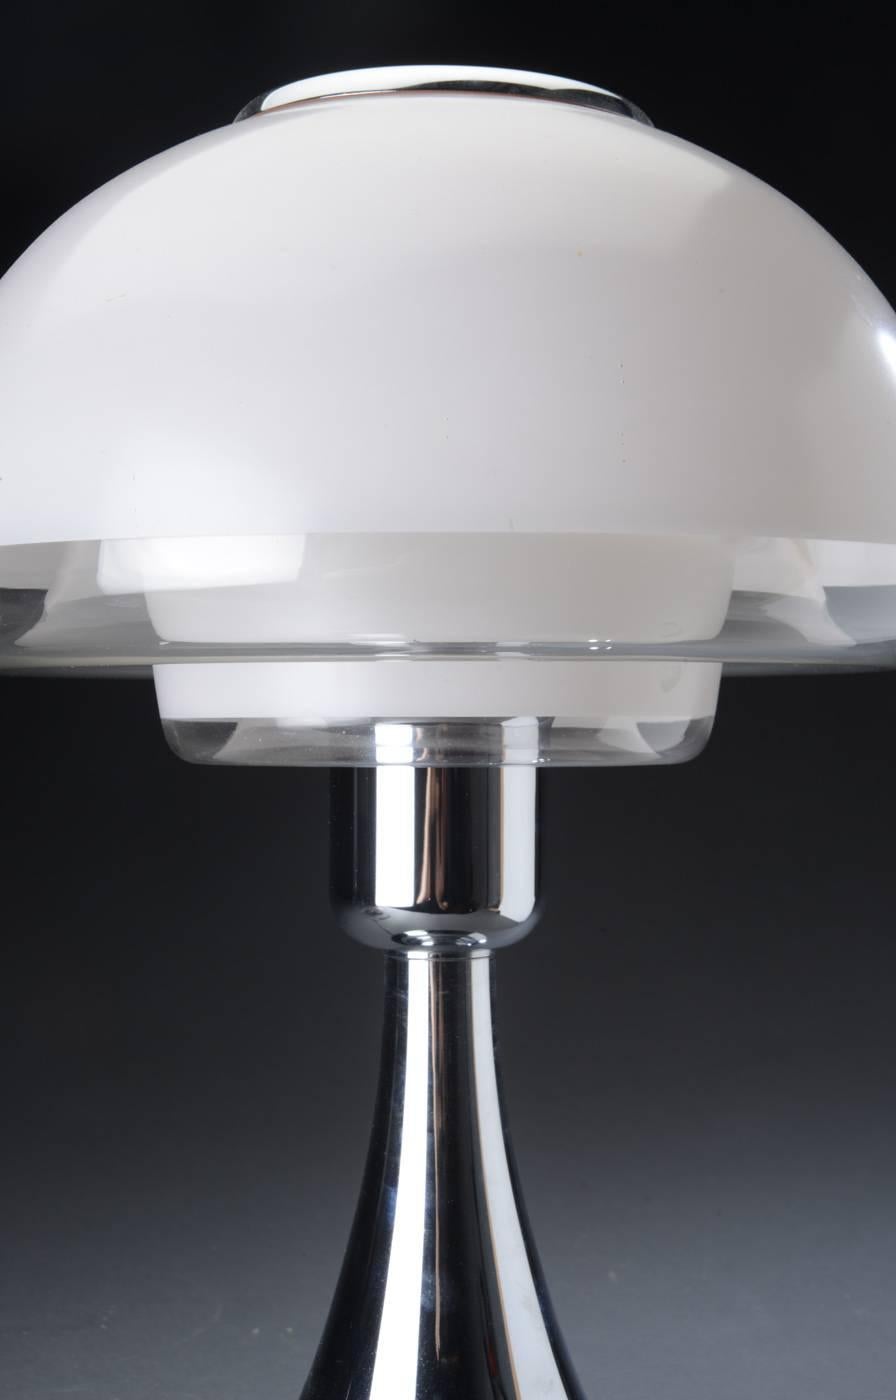 A very nice original example of this scarce lamp designed by Verner Panton for Louis Poulsen, Denmark, in full working condition.